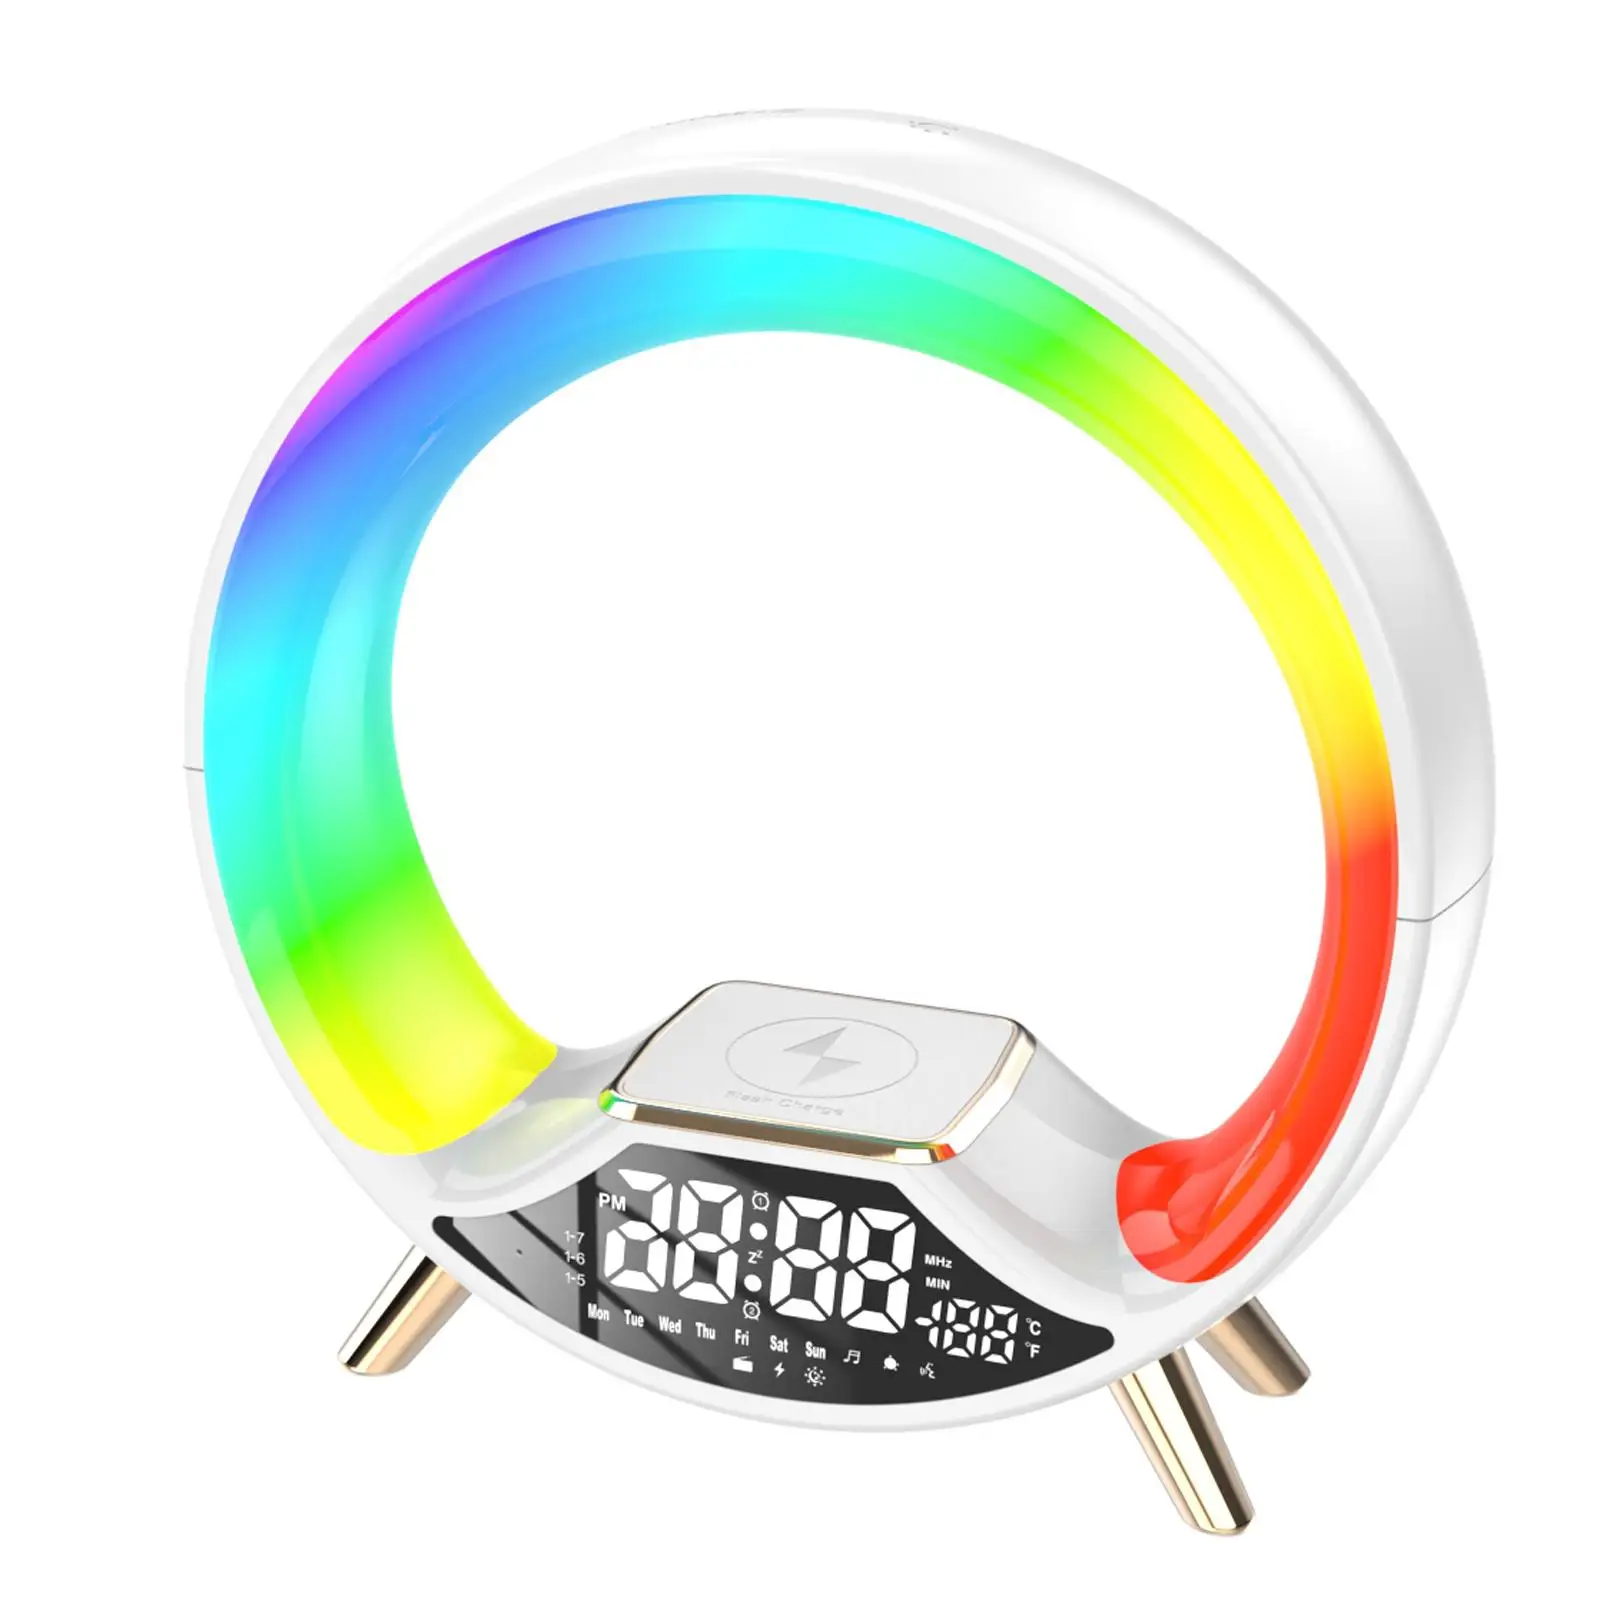 Digital Alarm Clock with Colorful Light Electronic Desktop Clock Mute Bedside Small Alarm Clock for Bedroom Office Home Decor